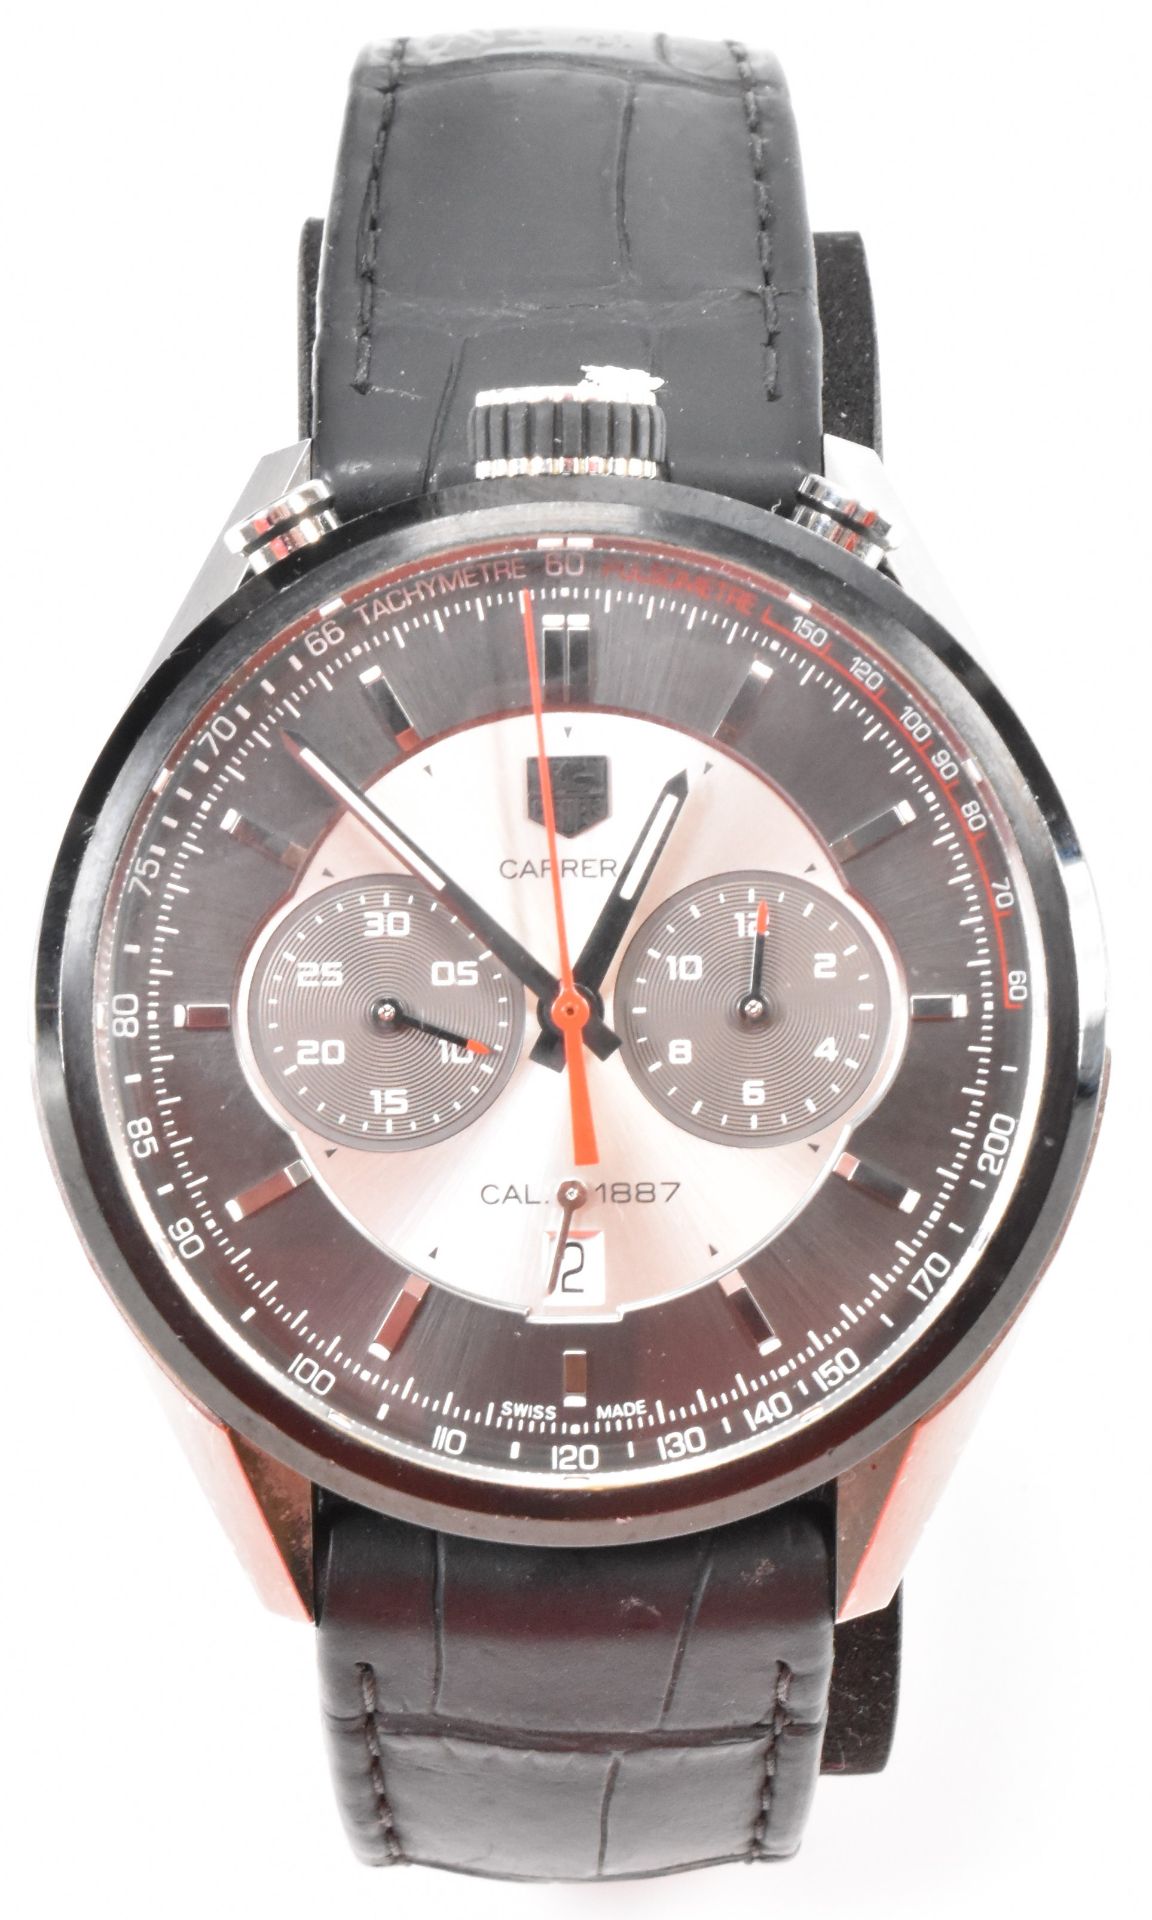 TAG HEUER CARRERA 50TH ANNIVERSARY LIMITED EDITION WATCH